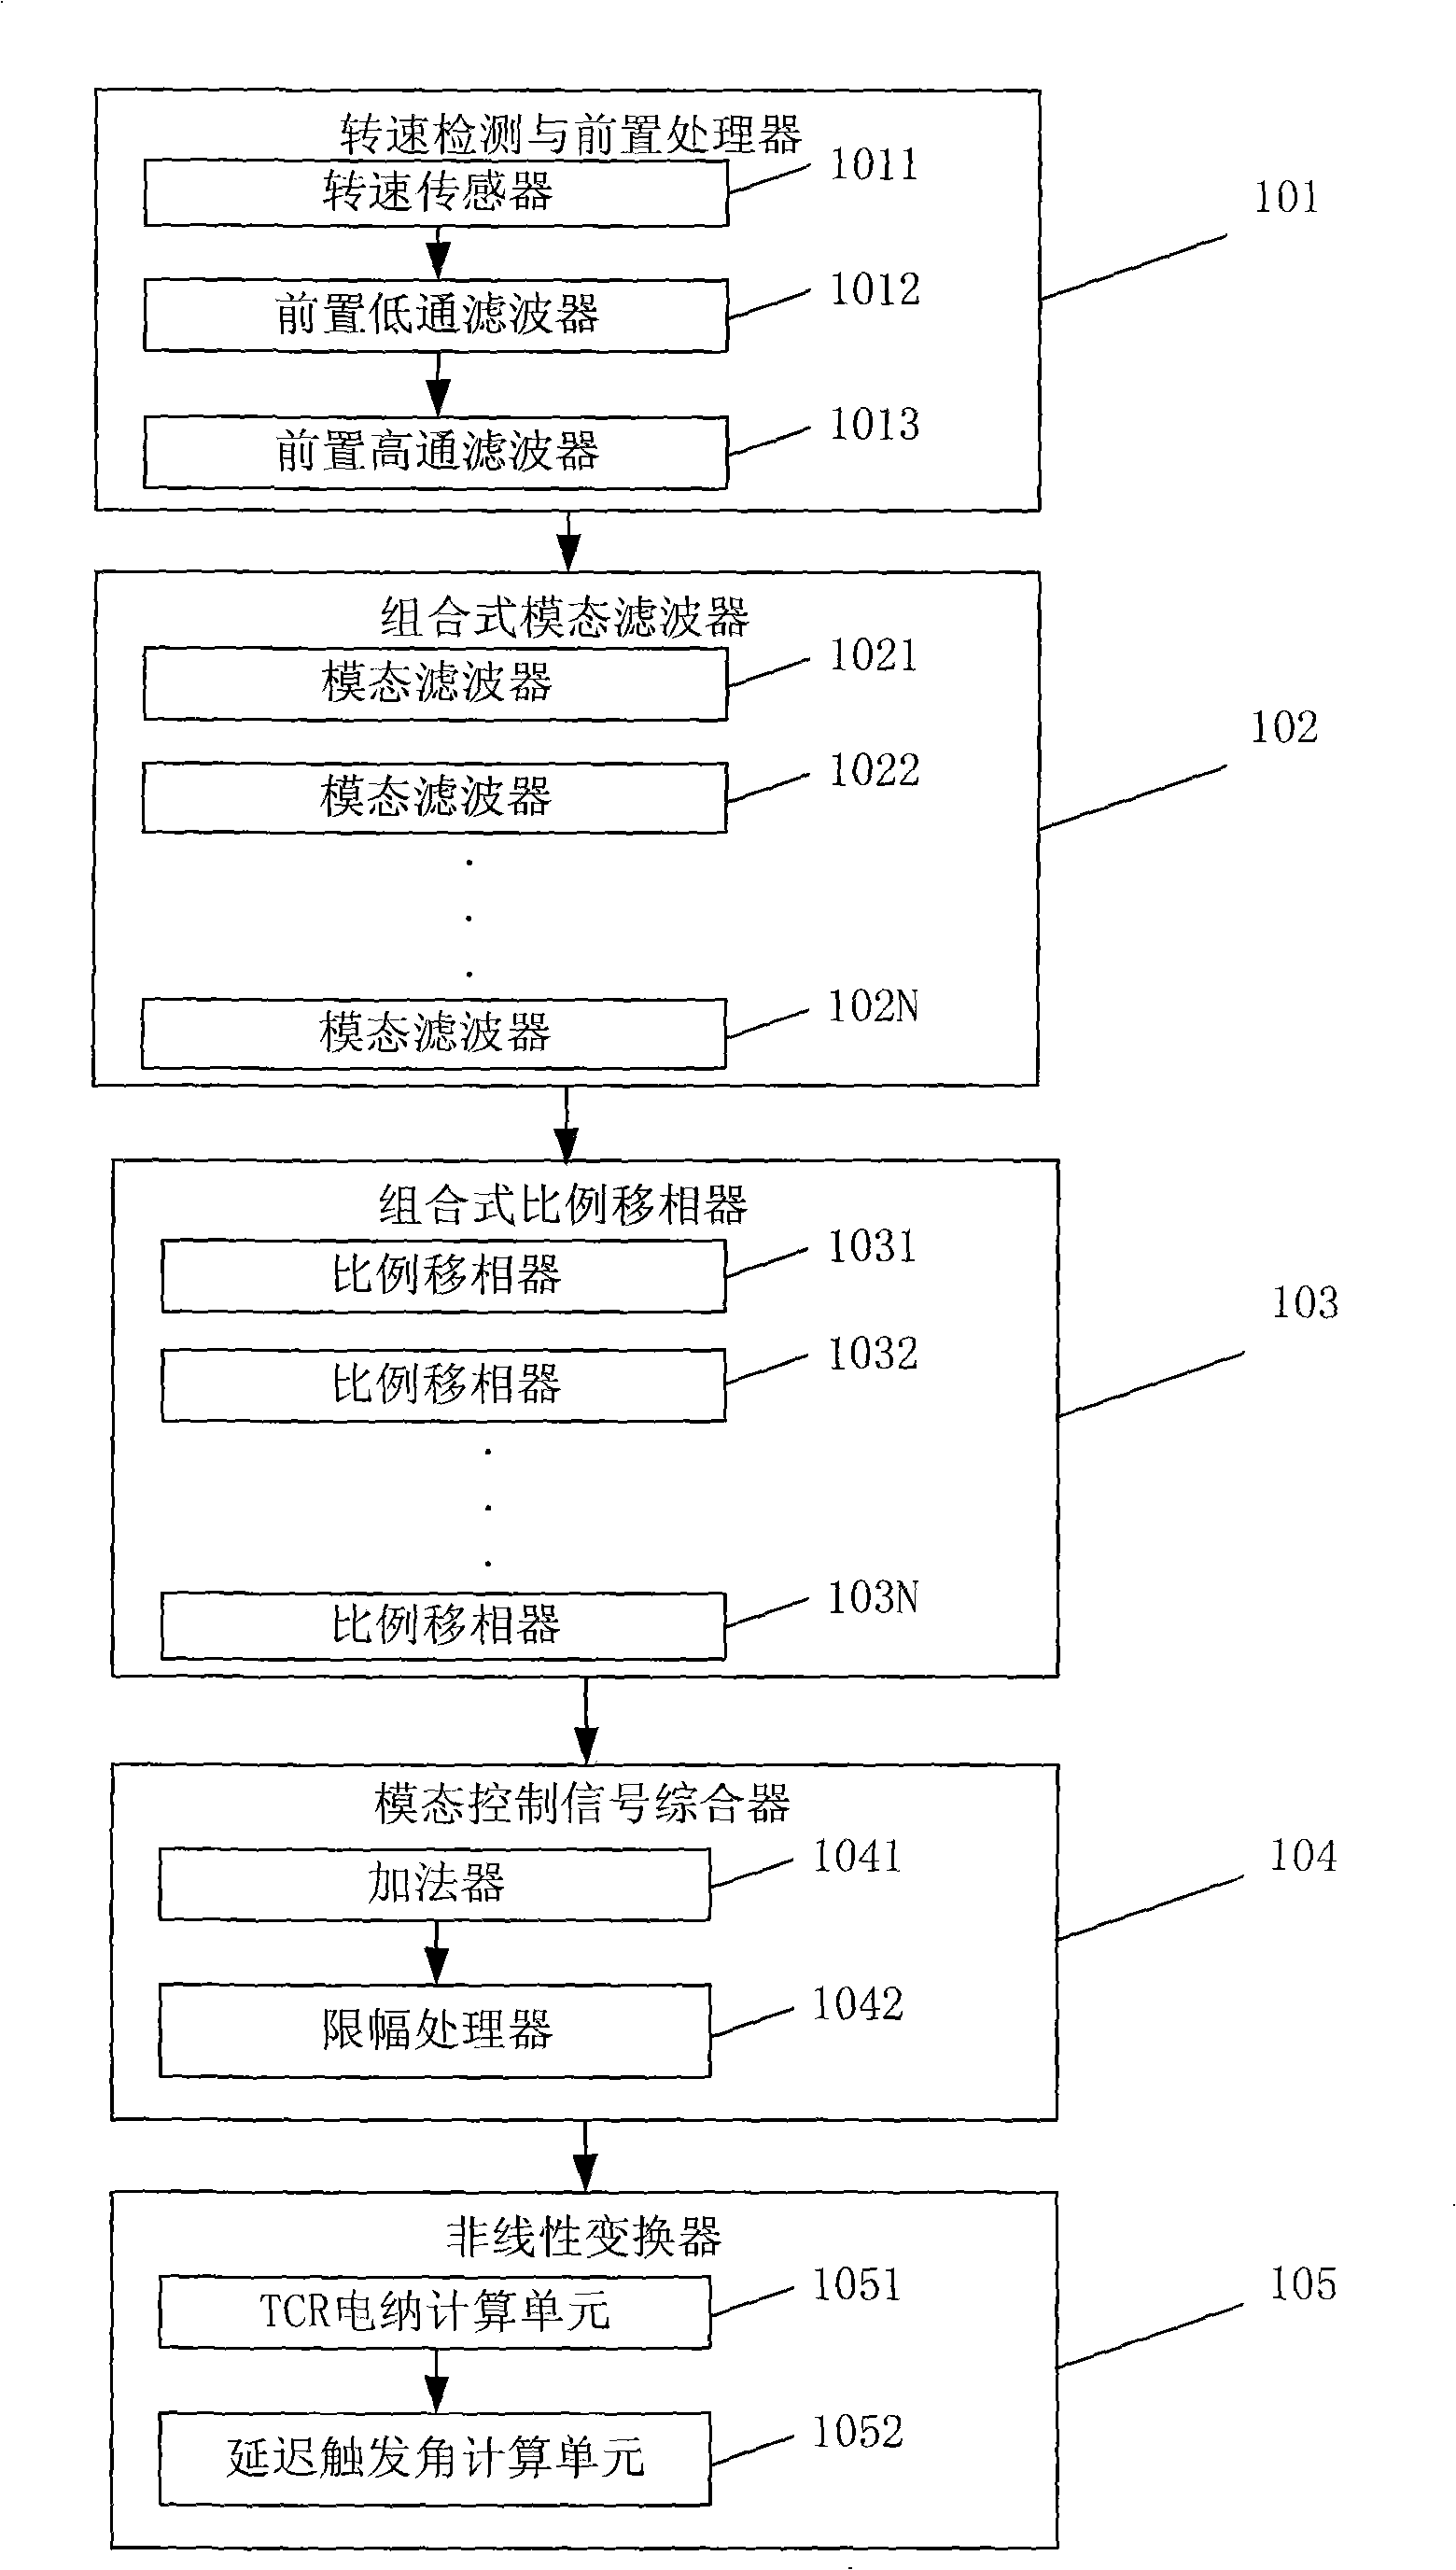 Hyposynchronous damped control system